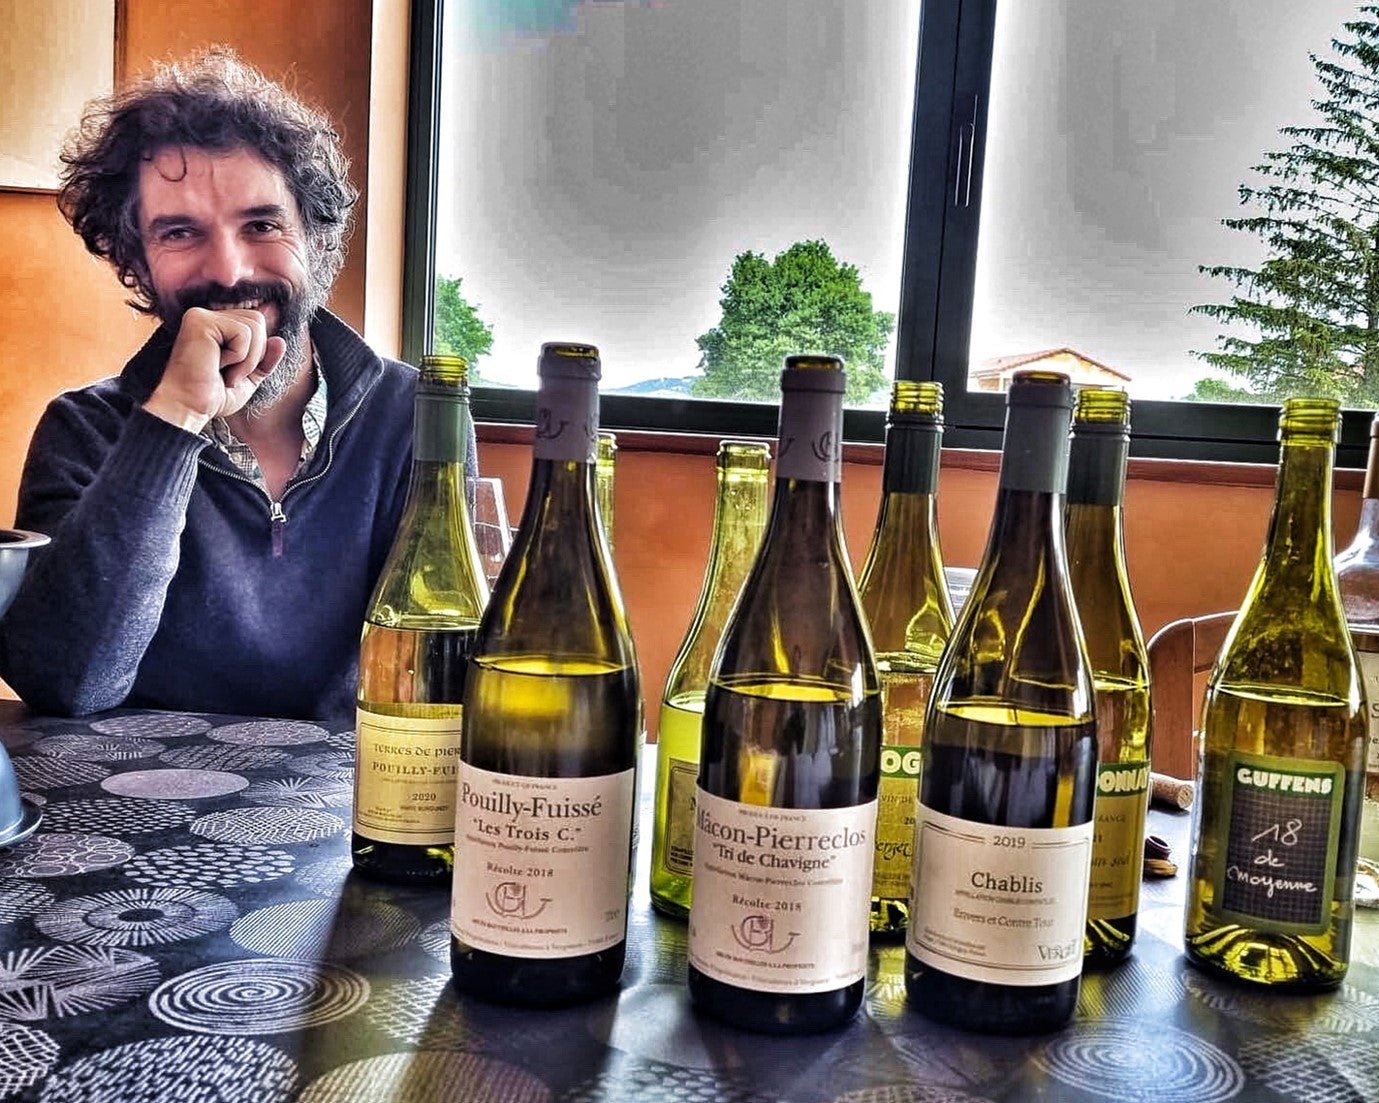 Verget: New White Burgundy (and Friends) from a “Reference Point for the Mâconnais” [Kelley]